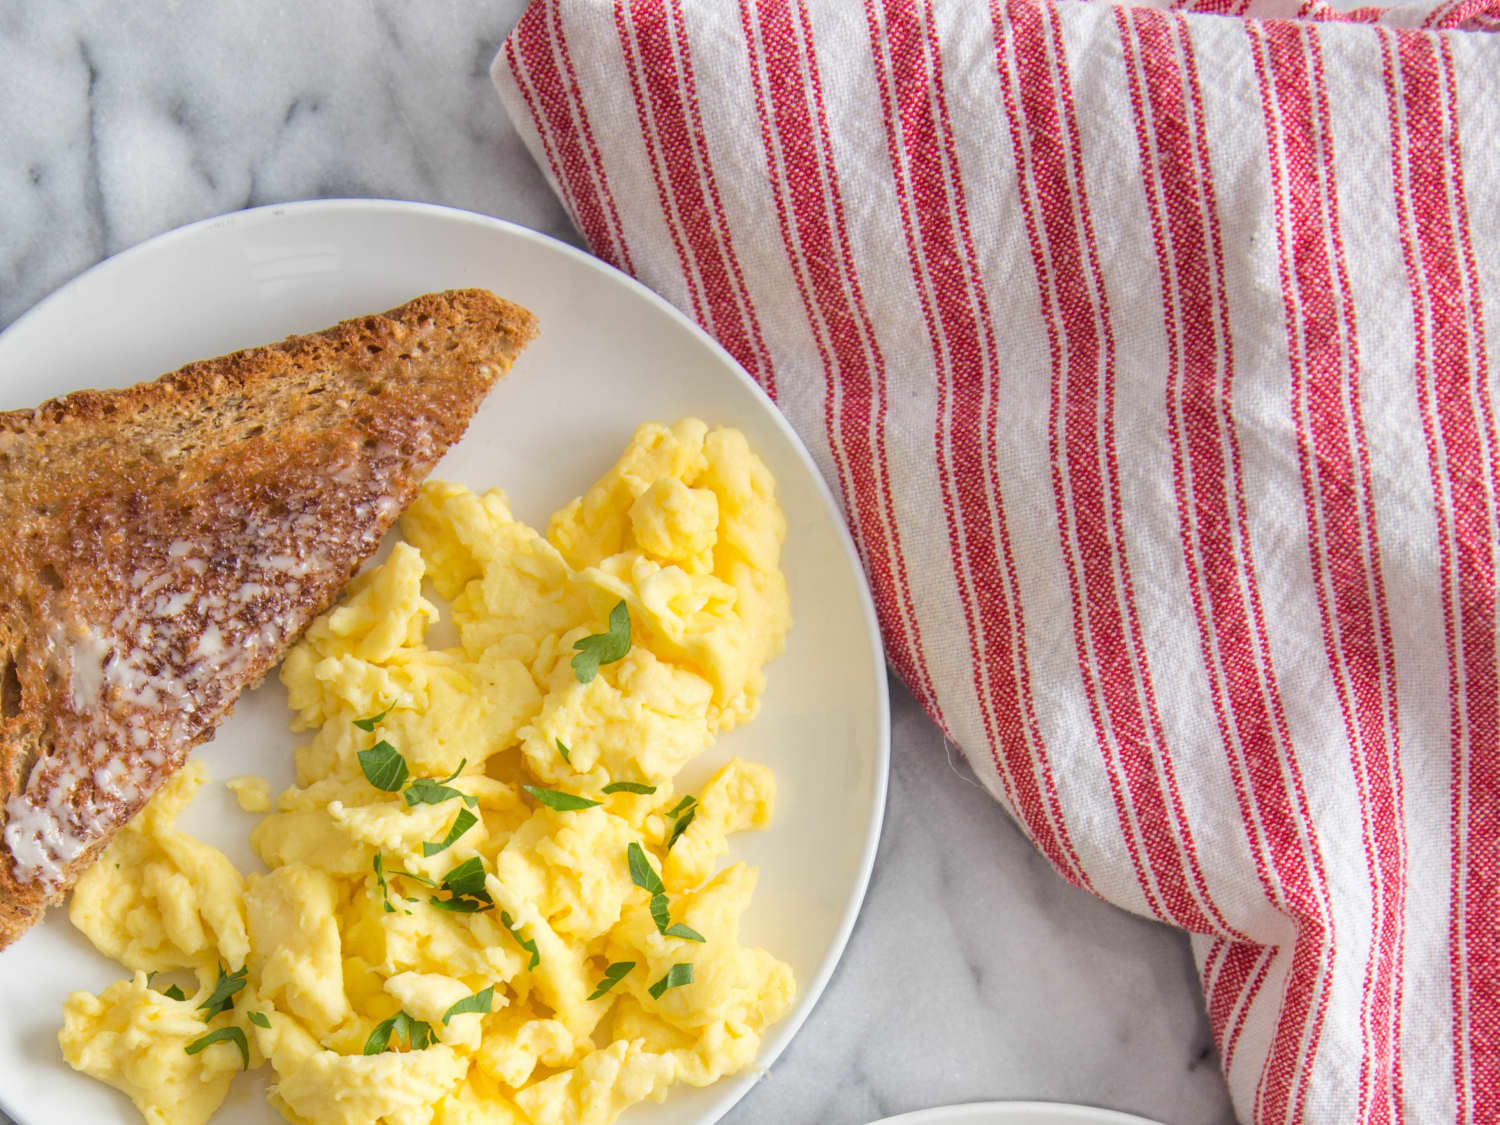 How to Make Scrambled Eggs in the Microwave